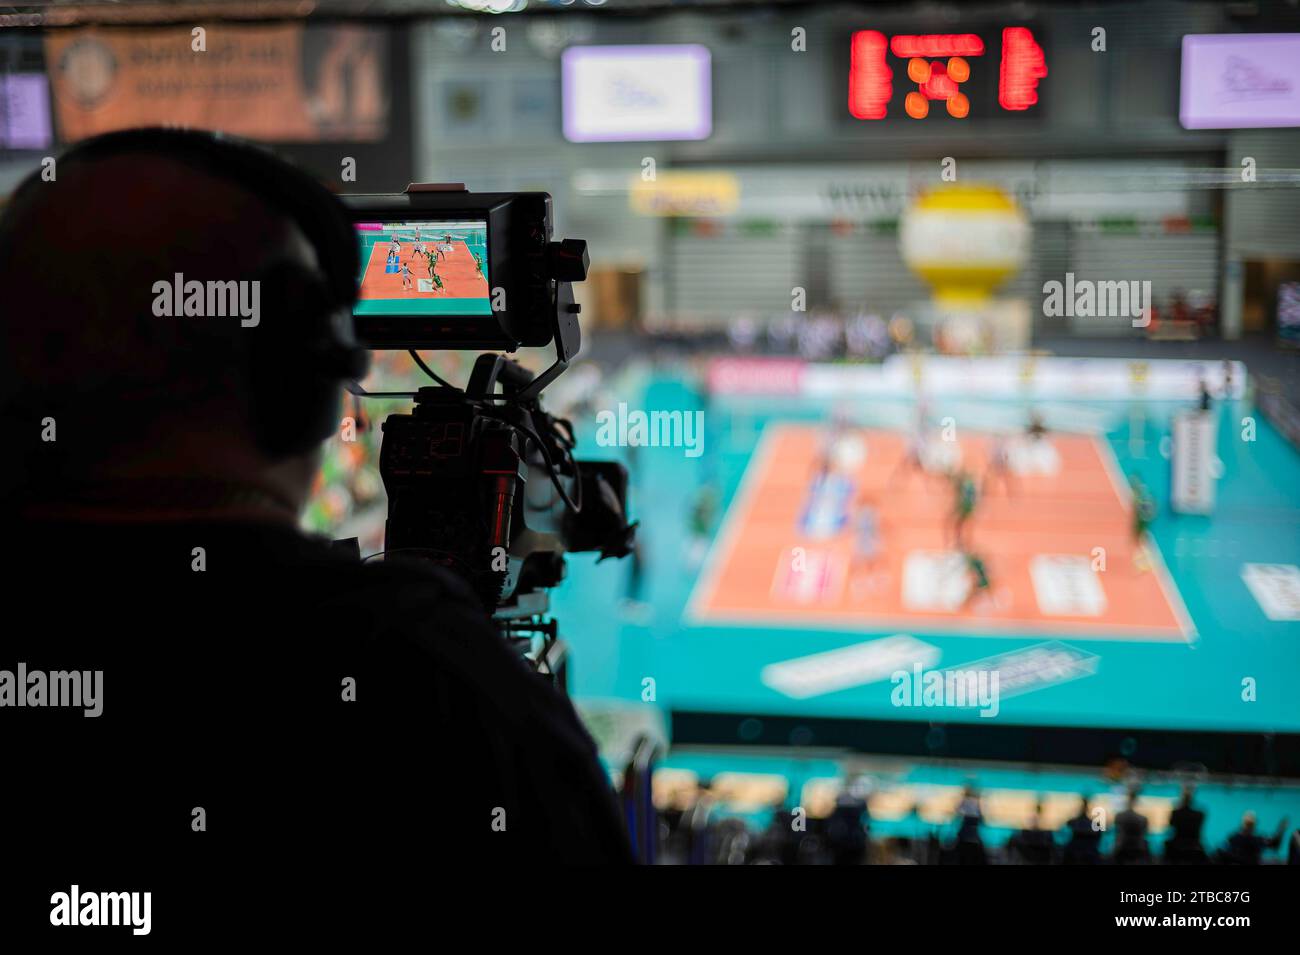 Professional TV camera in sports hall during volleyball match. Stock Photo